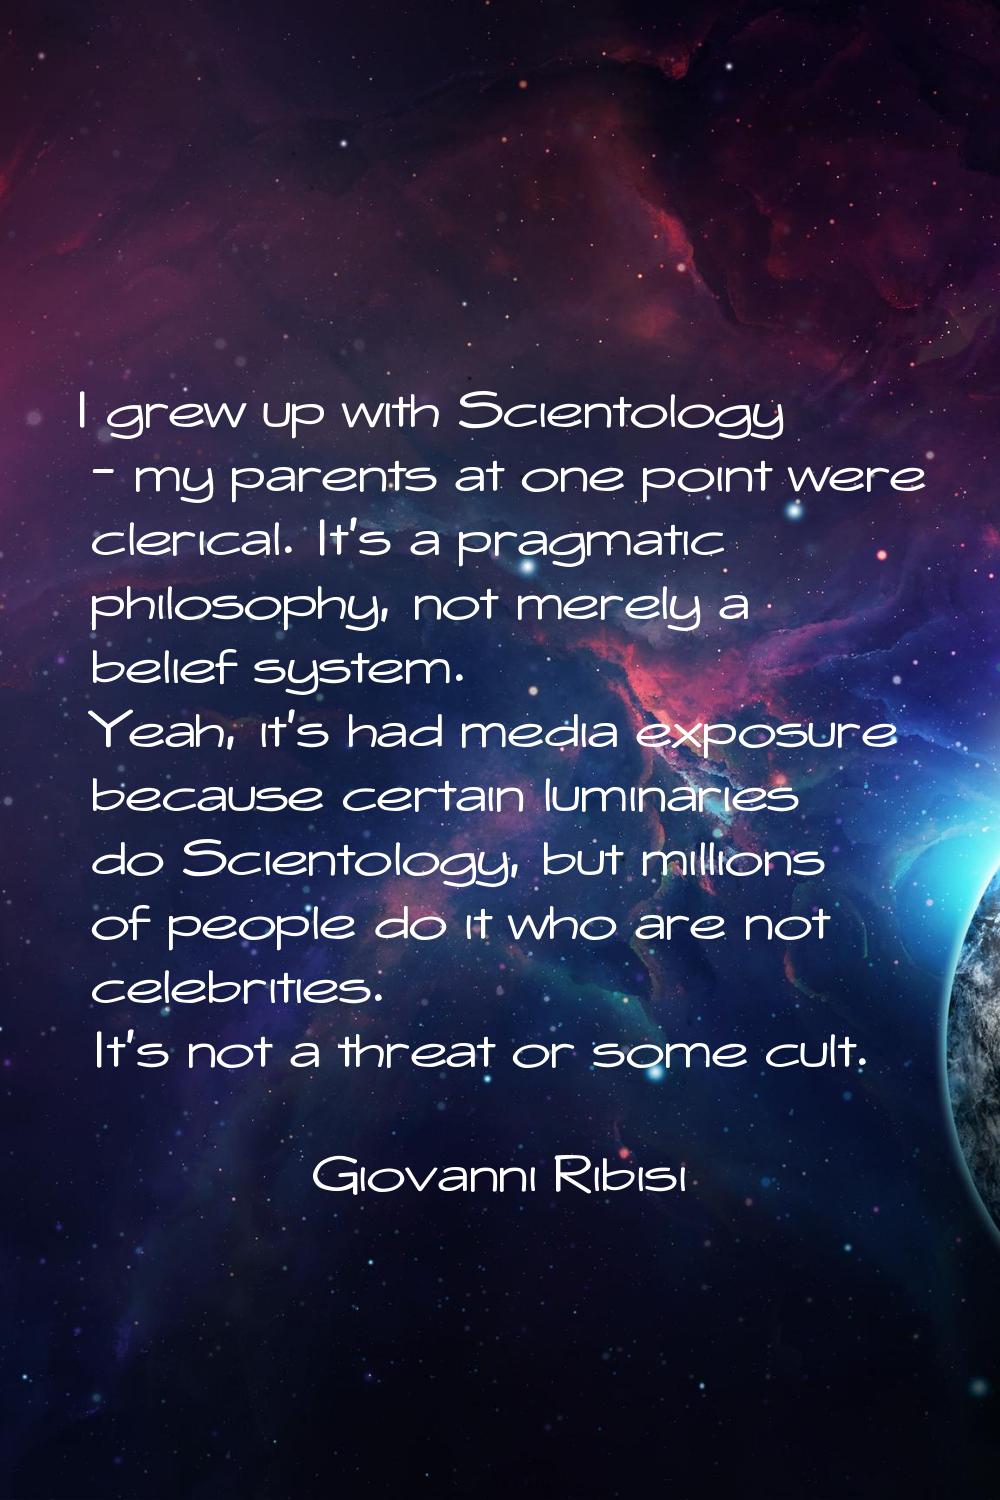 I grew up with Scientology - my parents at one point were clerical. It's a pragmatic philosophy, no